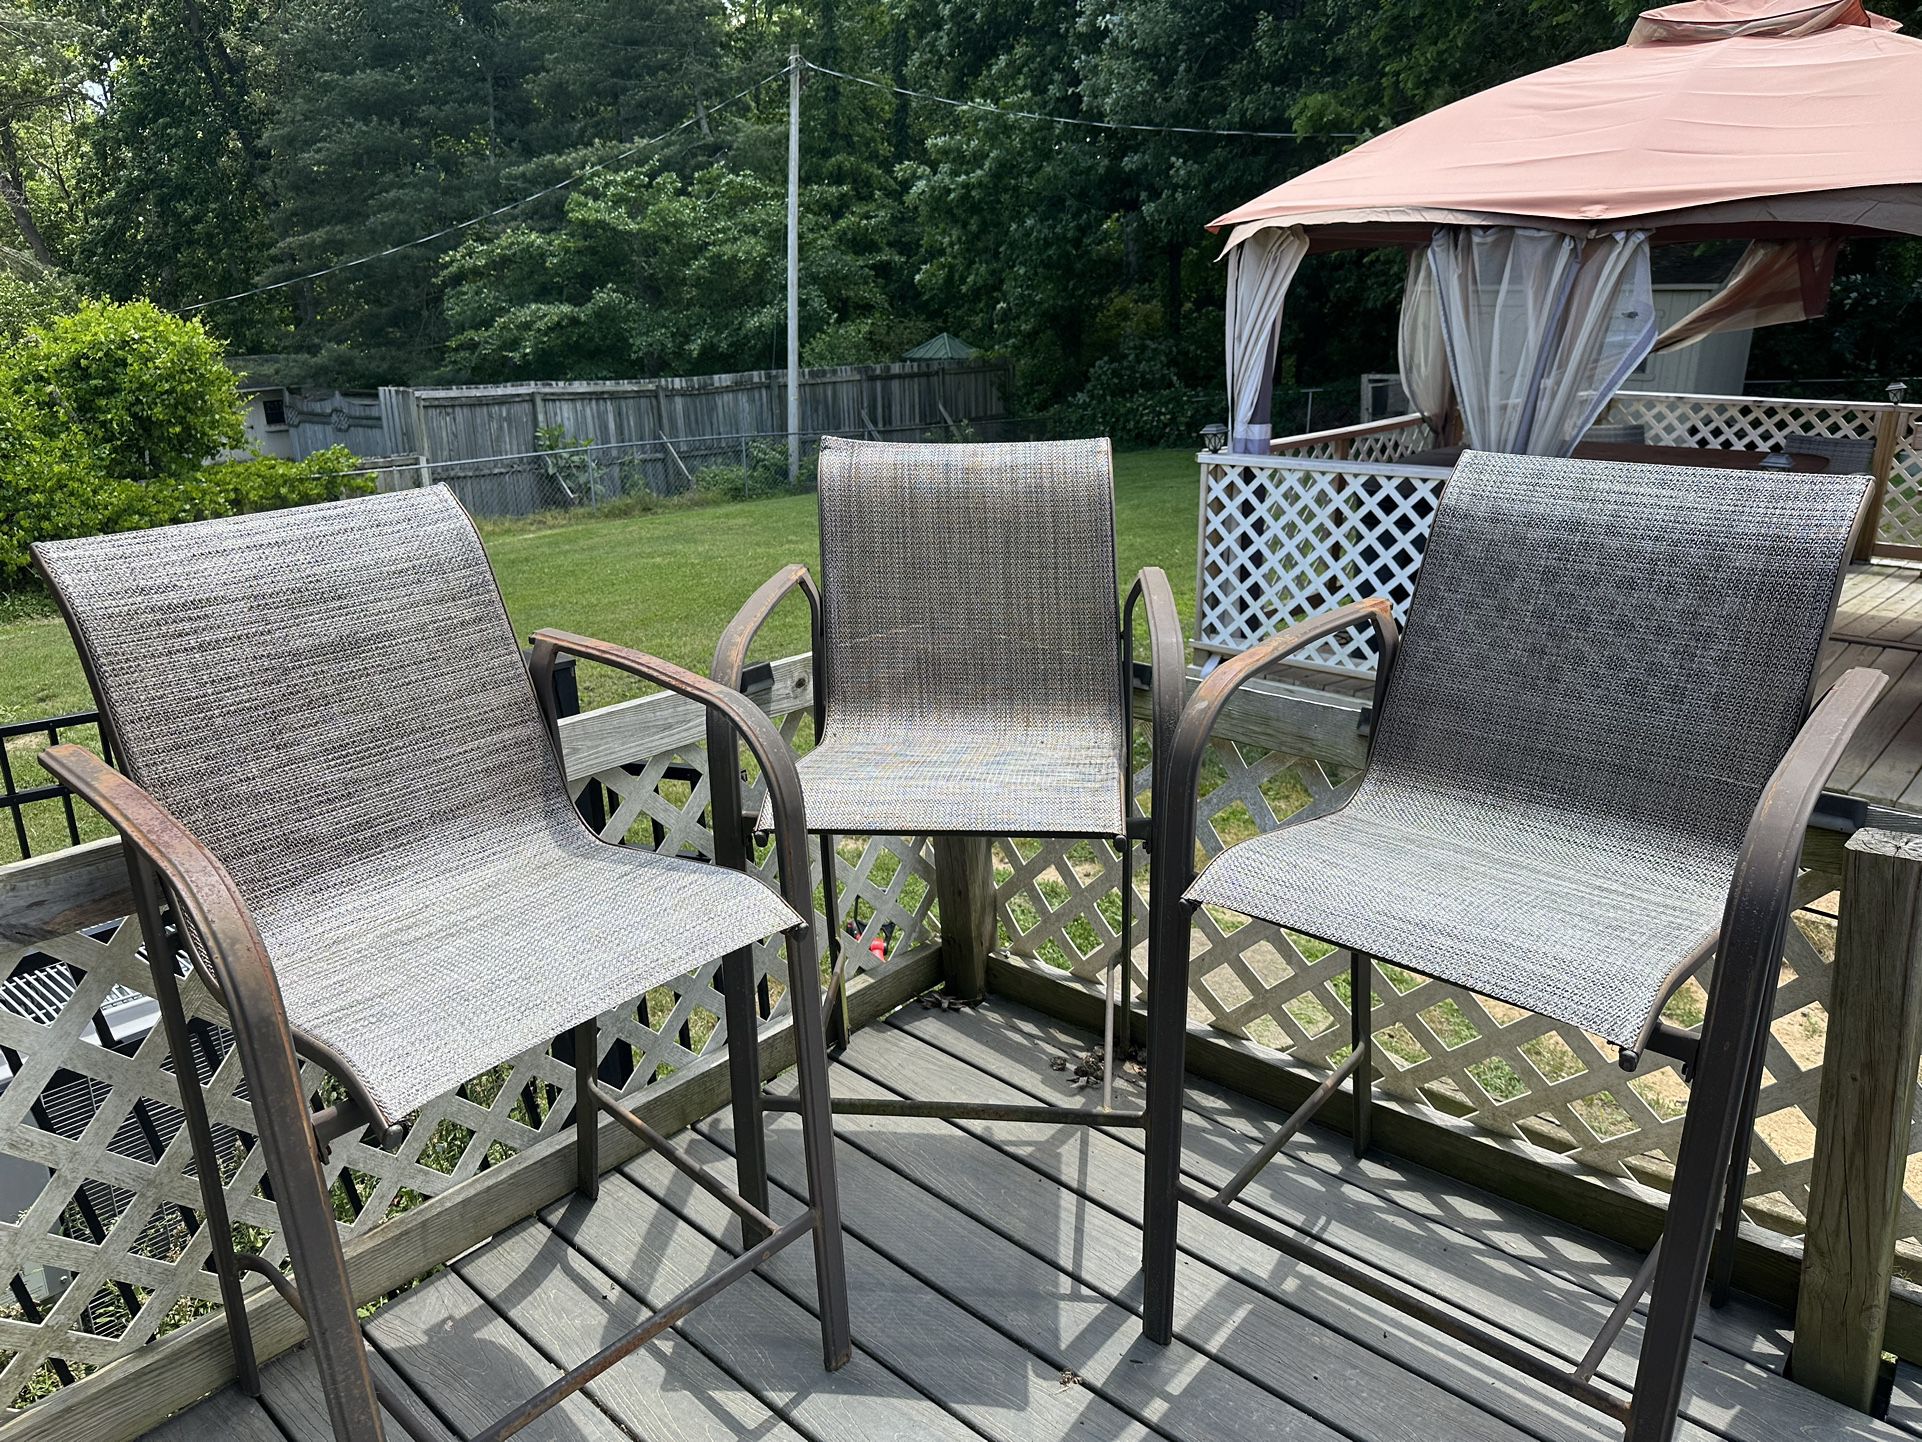 3 Outside Chairs